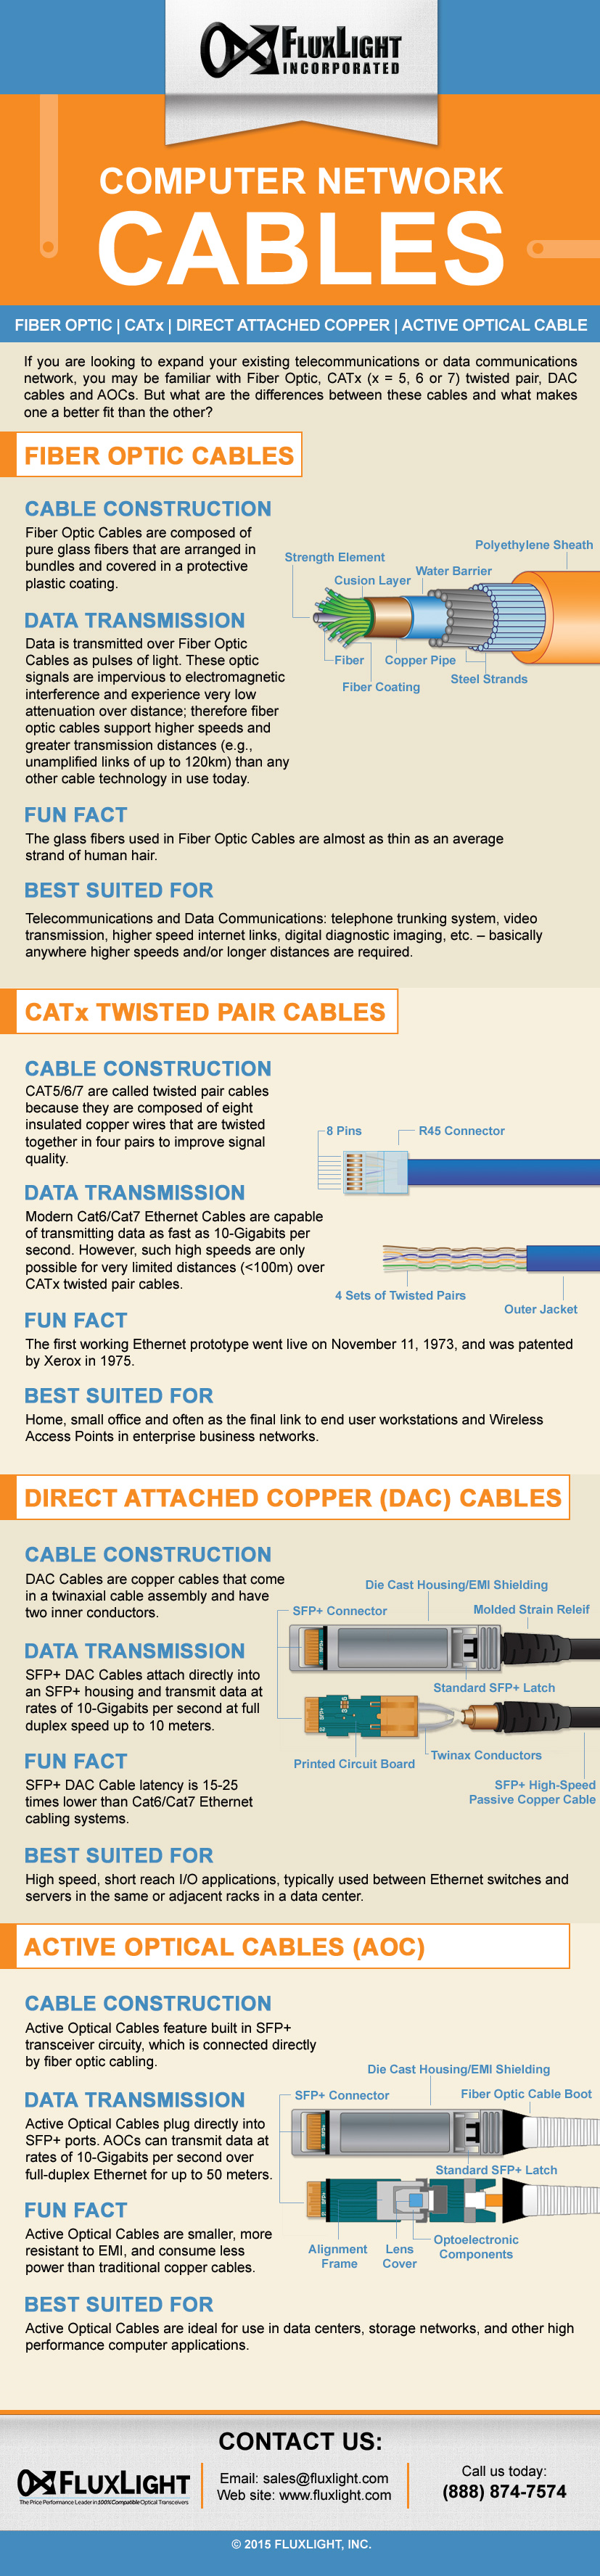 Network Cables Infographic